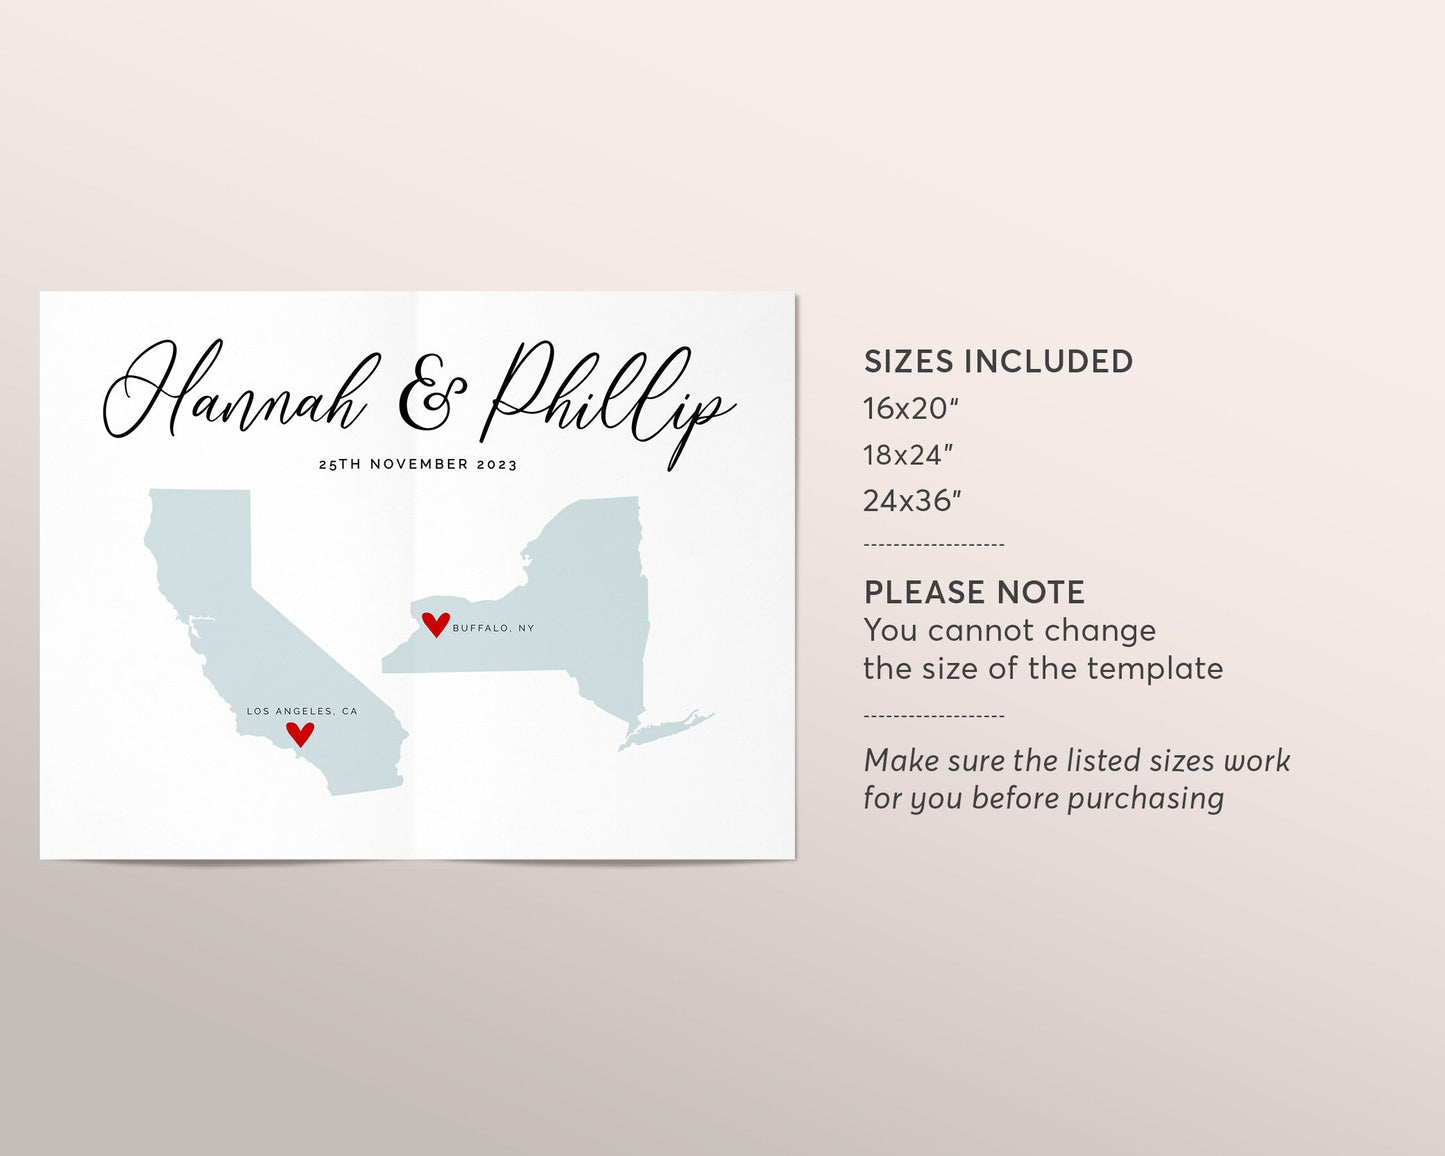 Editable Wedding Guest Book USA States Map Alternative Template, Long Distance GuestBook Poster, Custom State Map California New York Sign